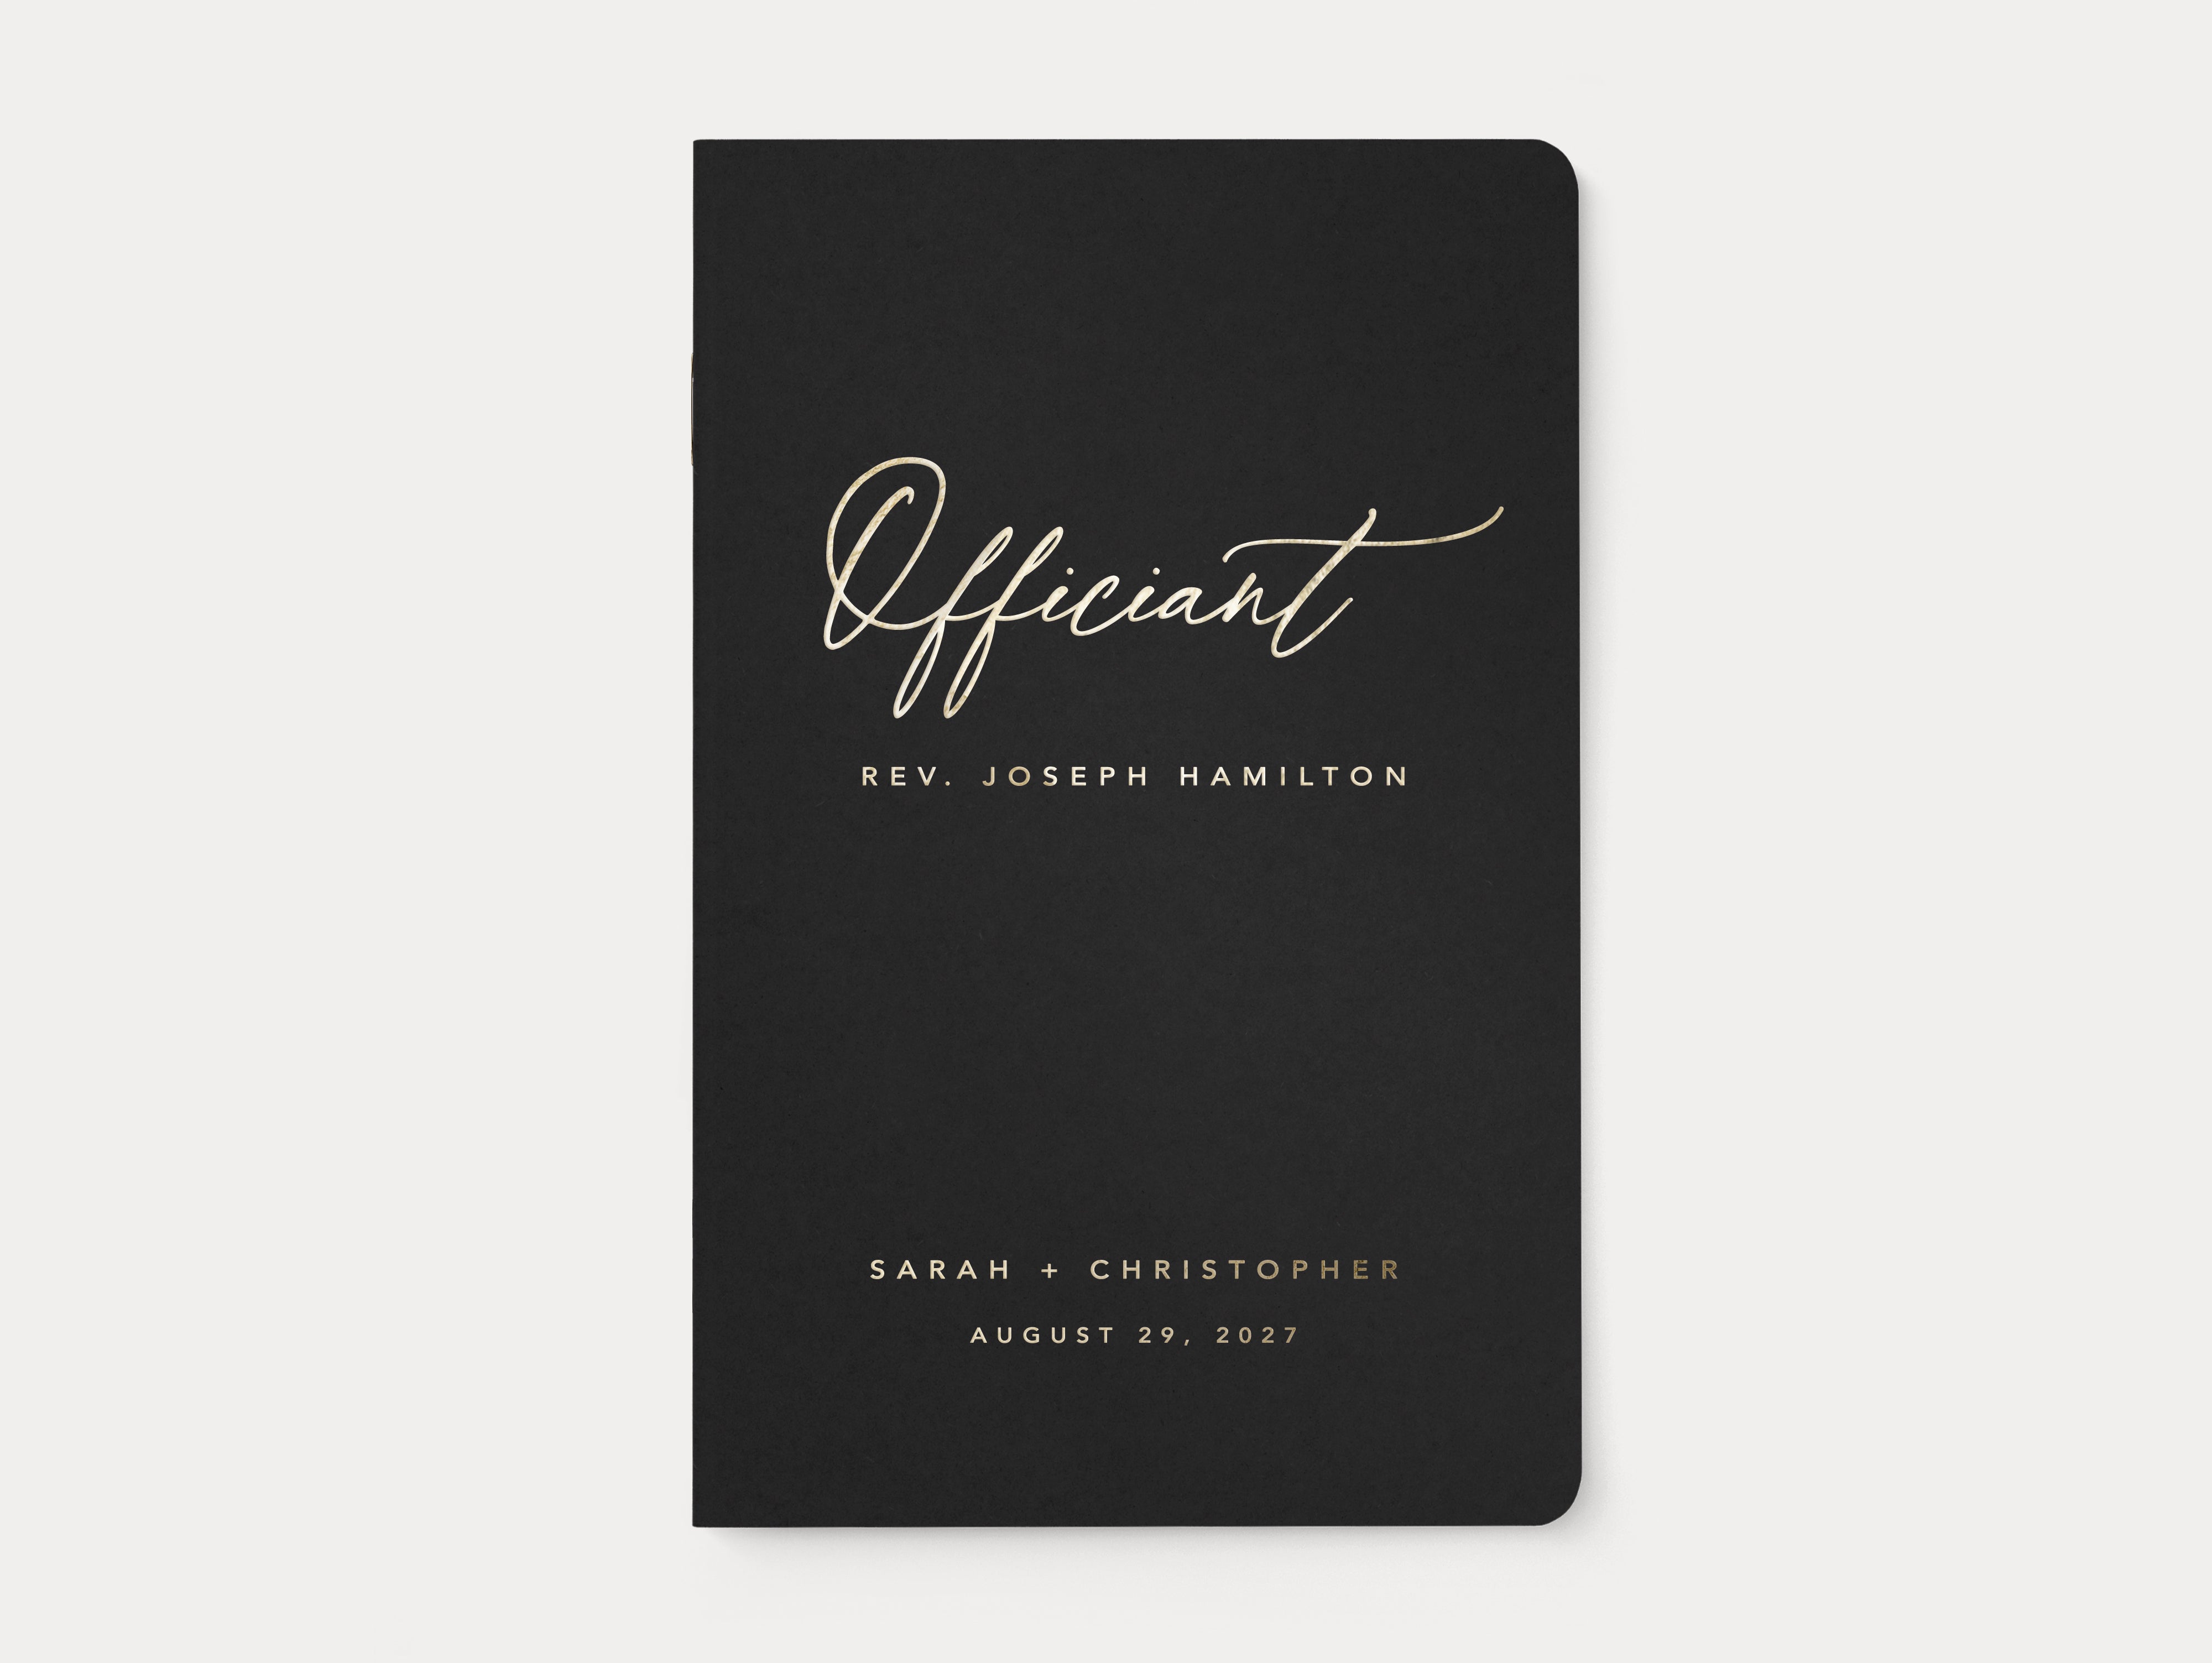 Black officiant ceremony book with custom gold foil lettering.